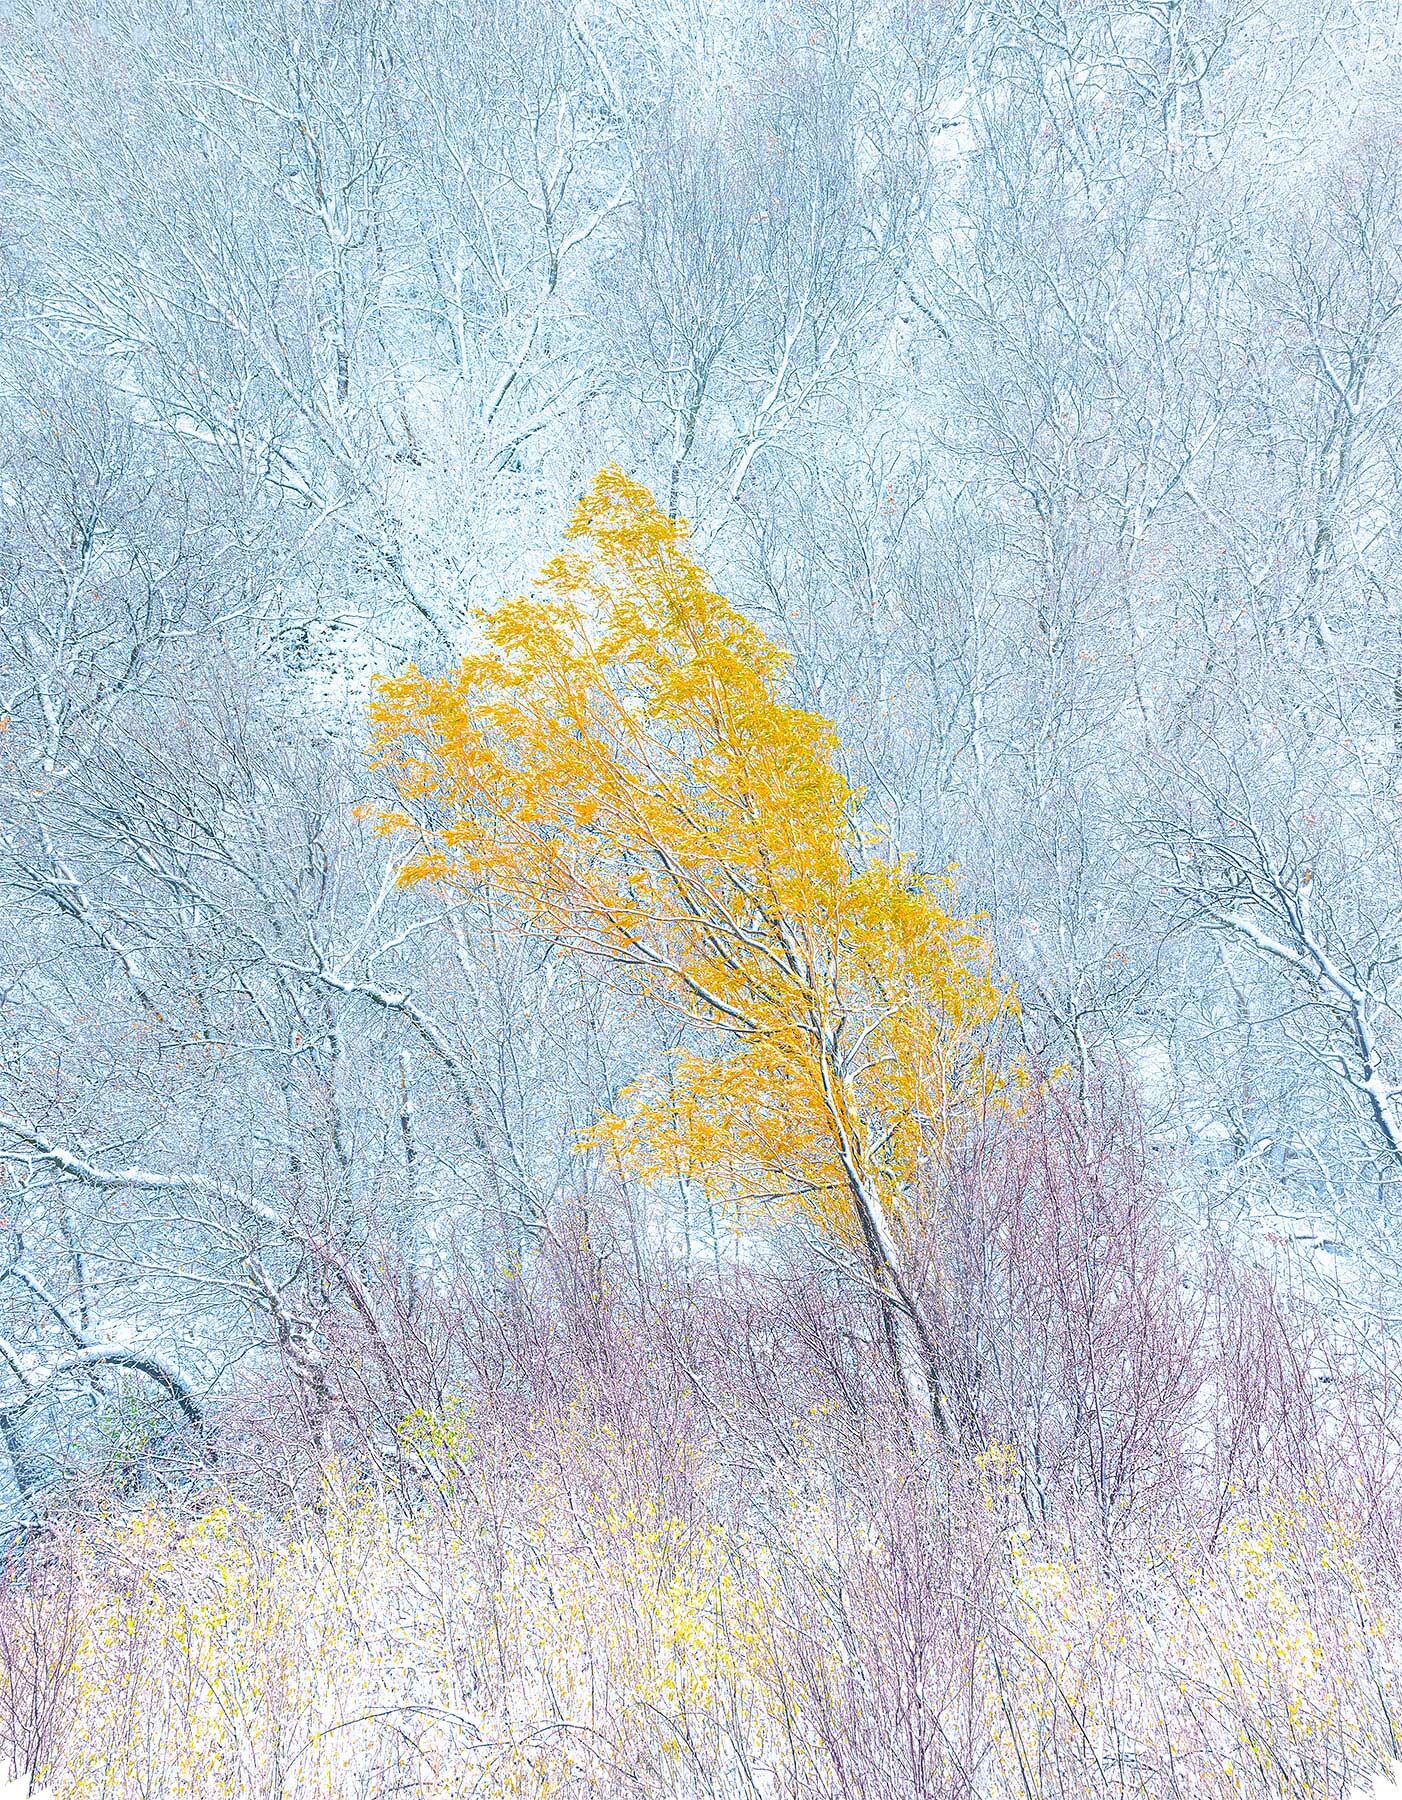 The etching of new snow amidst willow brush and a lone tree holding on to its autumn colors amidst rapidly changing seasons in...